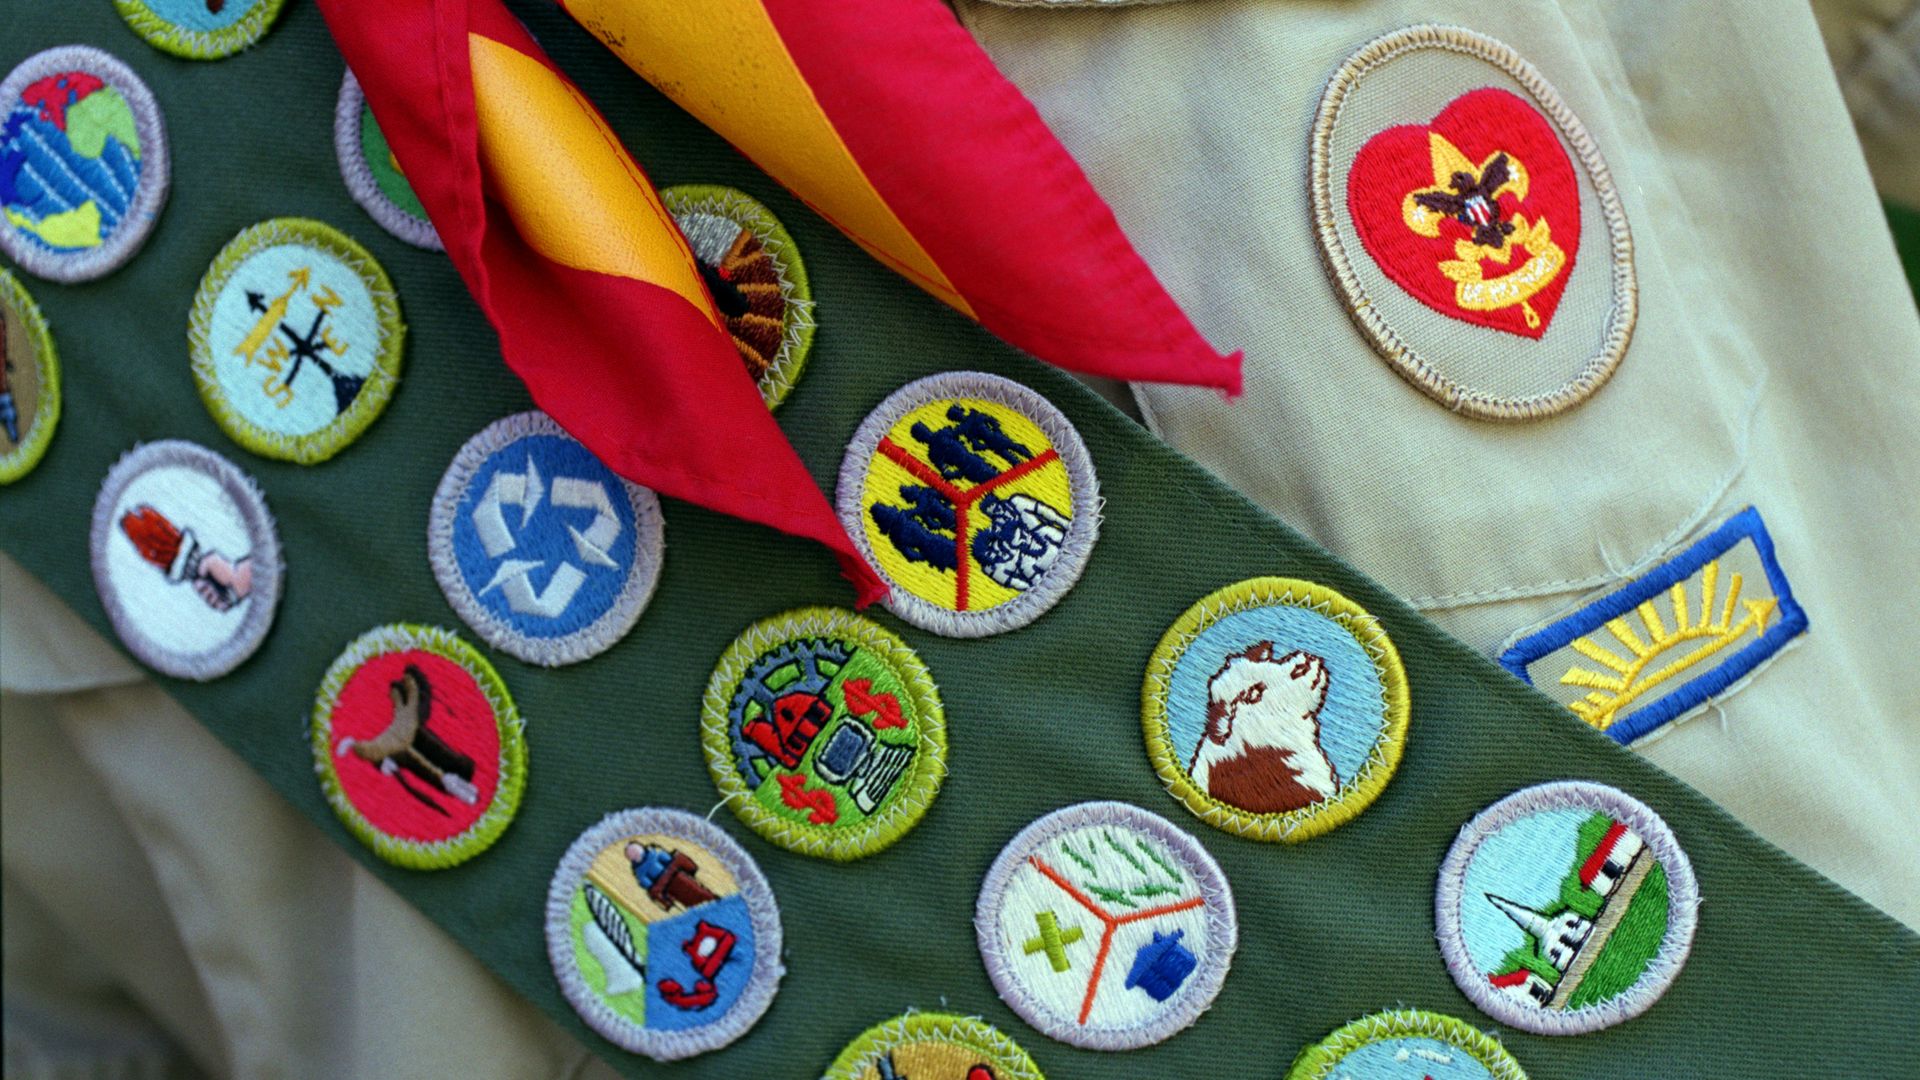 An image of a sash with several merit badges on it 